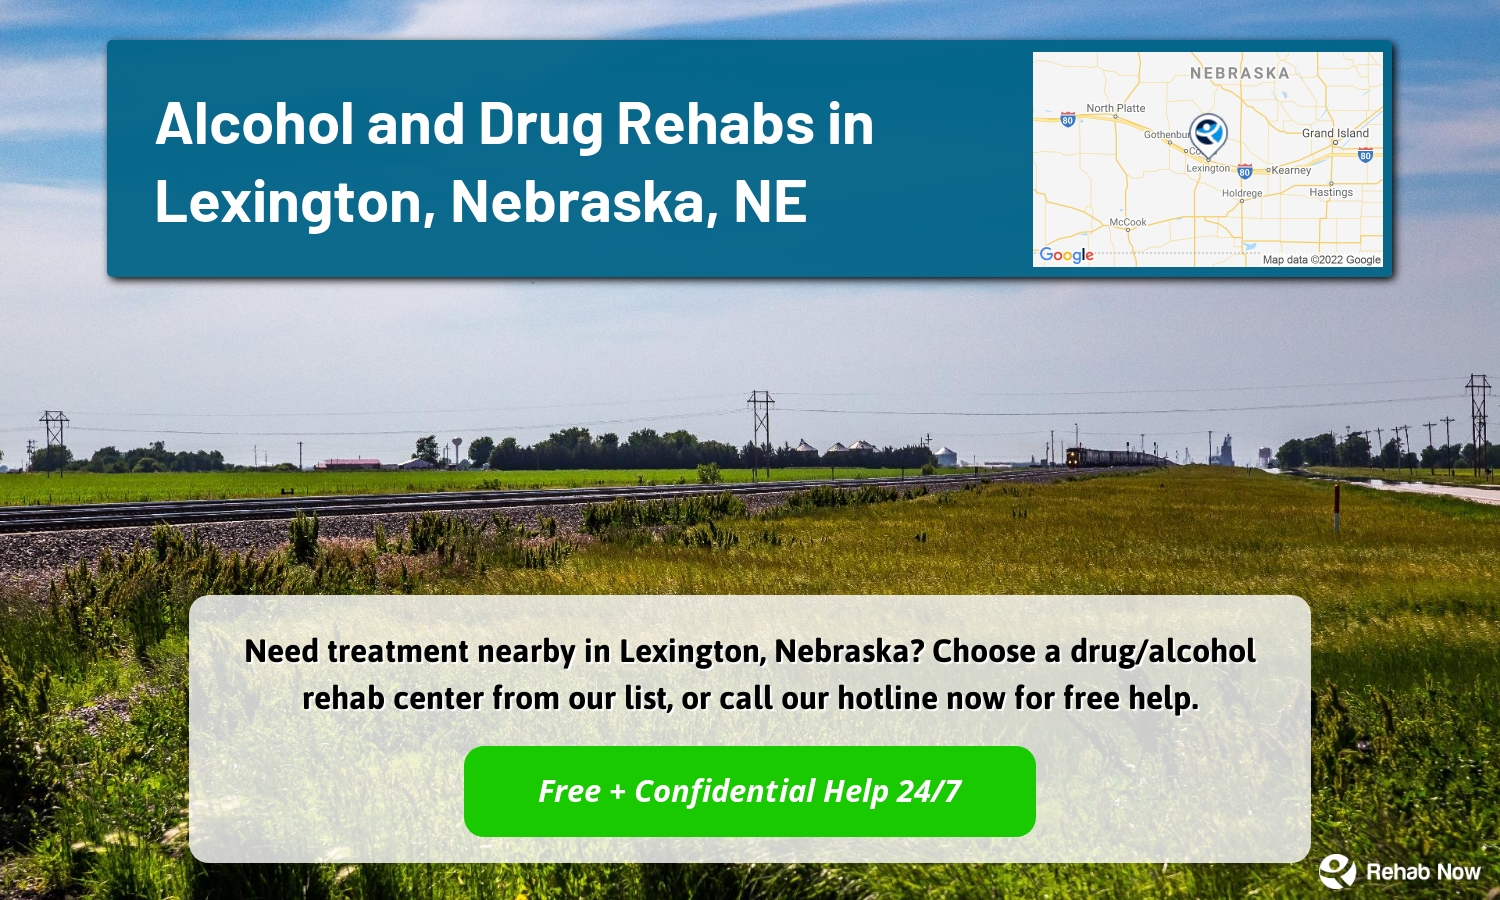 Need treatment nearby in Lexington, Nebraska? Choose a drug/alcohol rehab center from our list, or call our hotline now for free help.